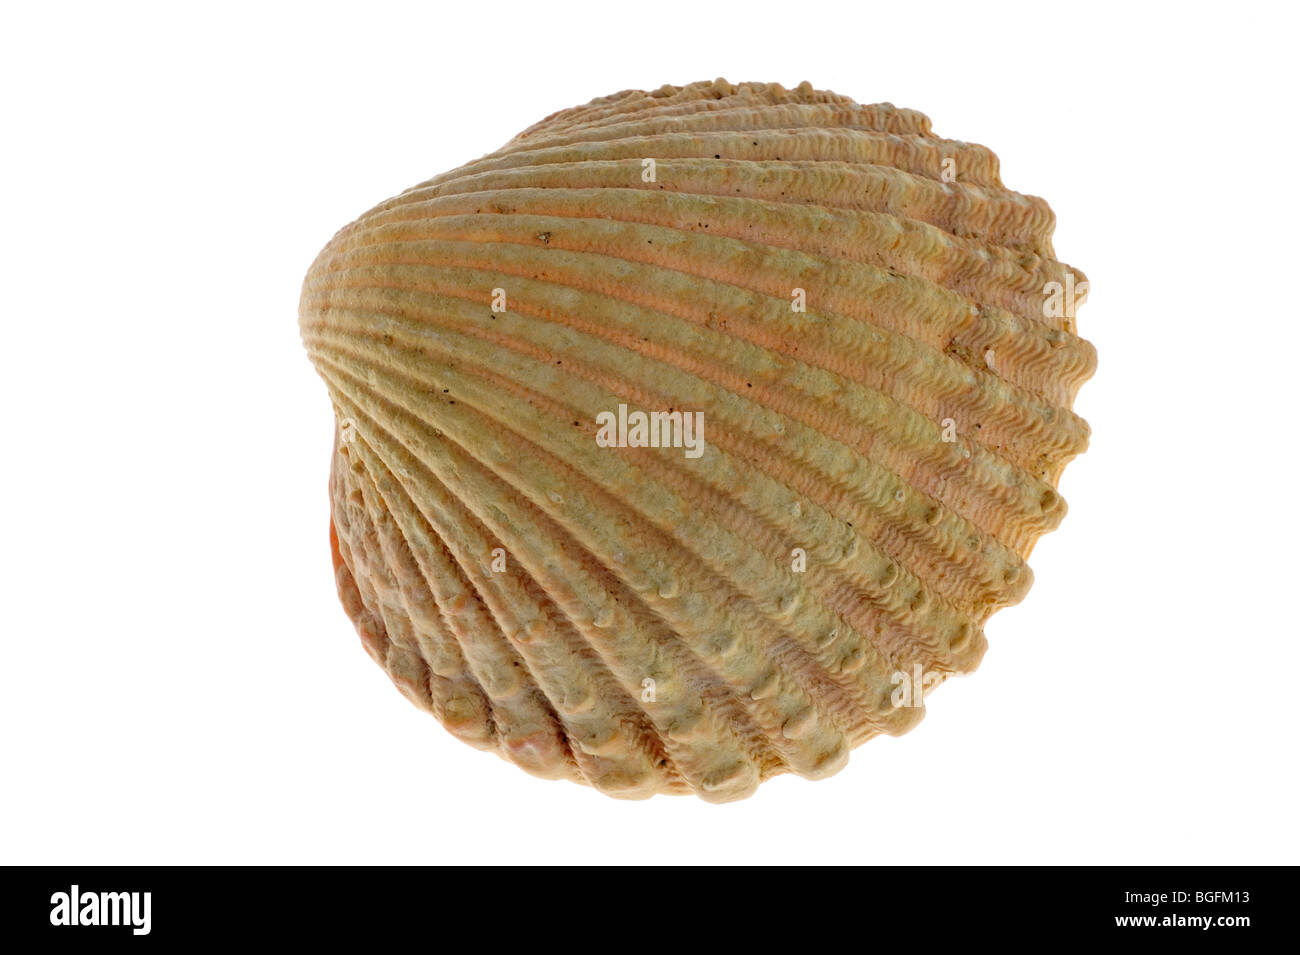 Prickly cockle (Acanthocardia echinata) shell, Brittany, France Stock Photo